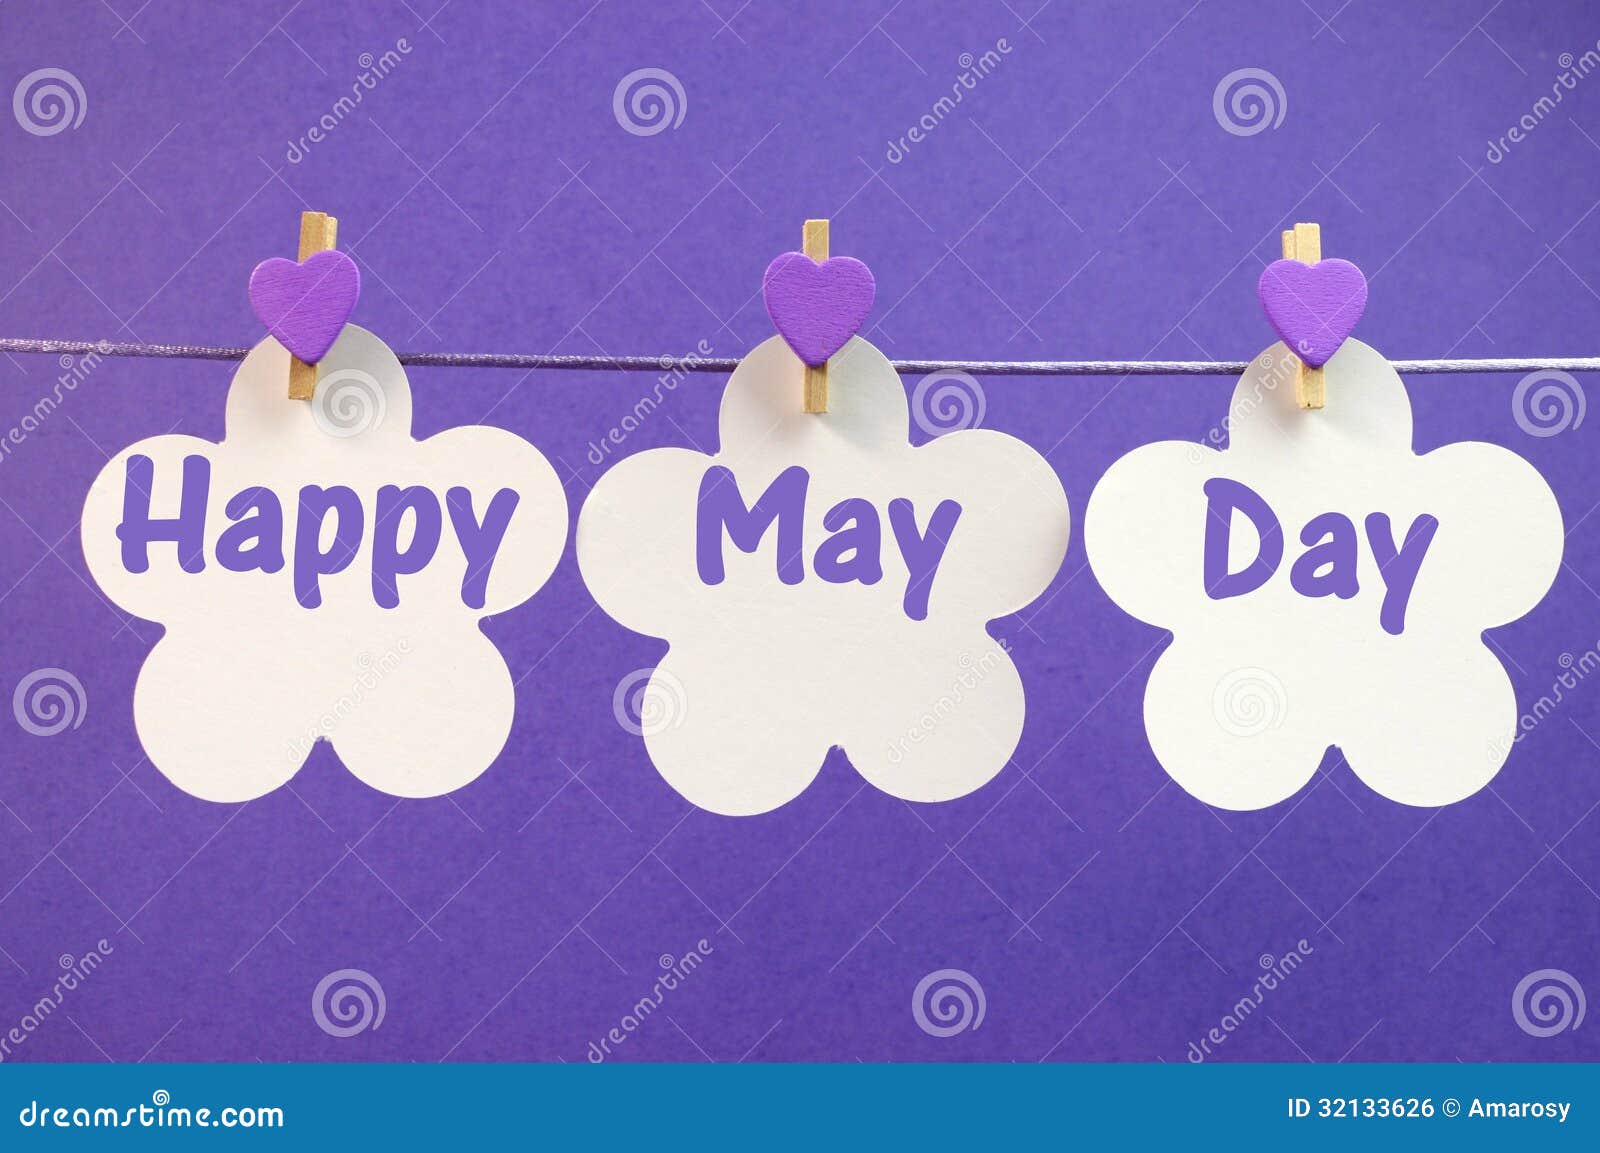 Happy May Day greeting message written across white flower cards with purple heart pegs hanging from pegs on a line for May Day, May 1, celebration.